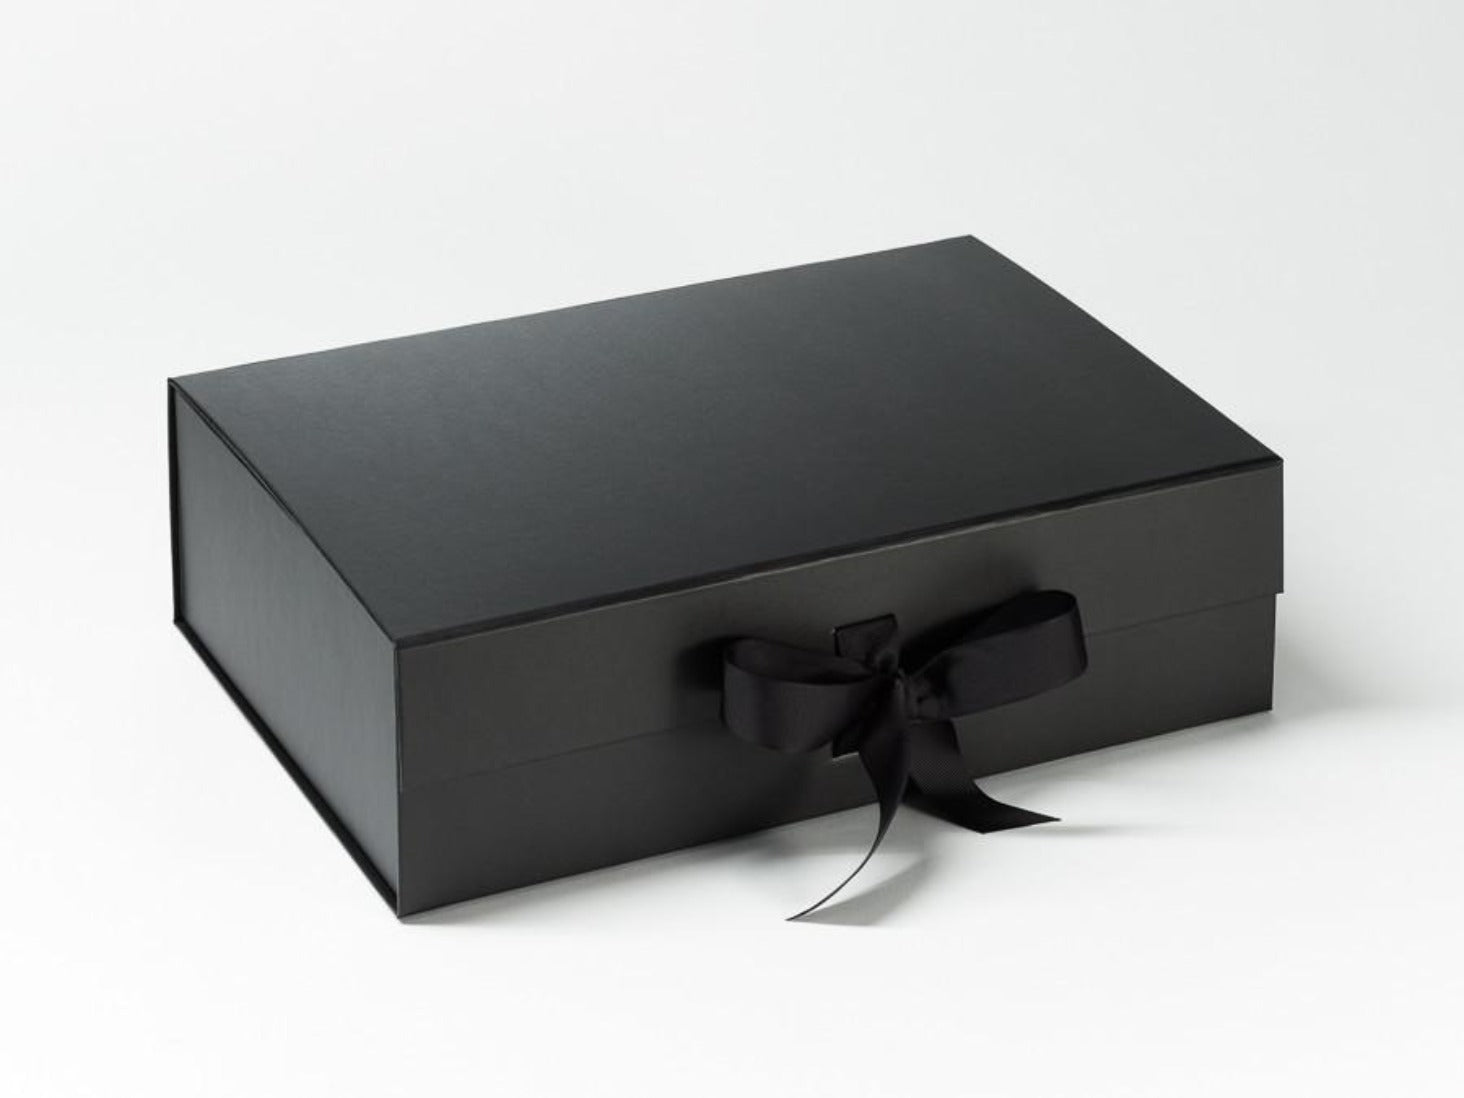 peddelen Cirkel Vakantie A4, A5 and A6 Size Luxury Gift Boxes and Hampers from Stock - FoldaBox USA